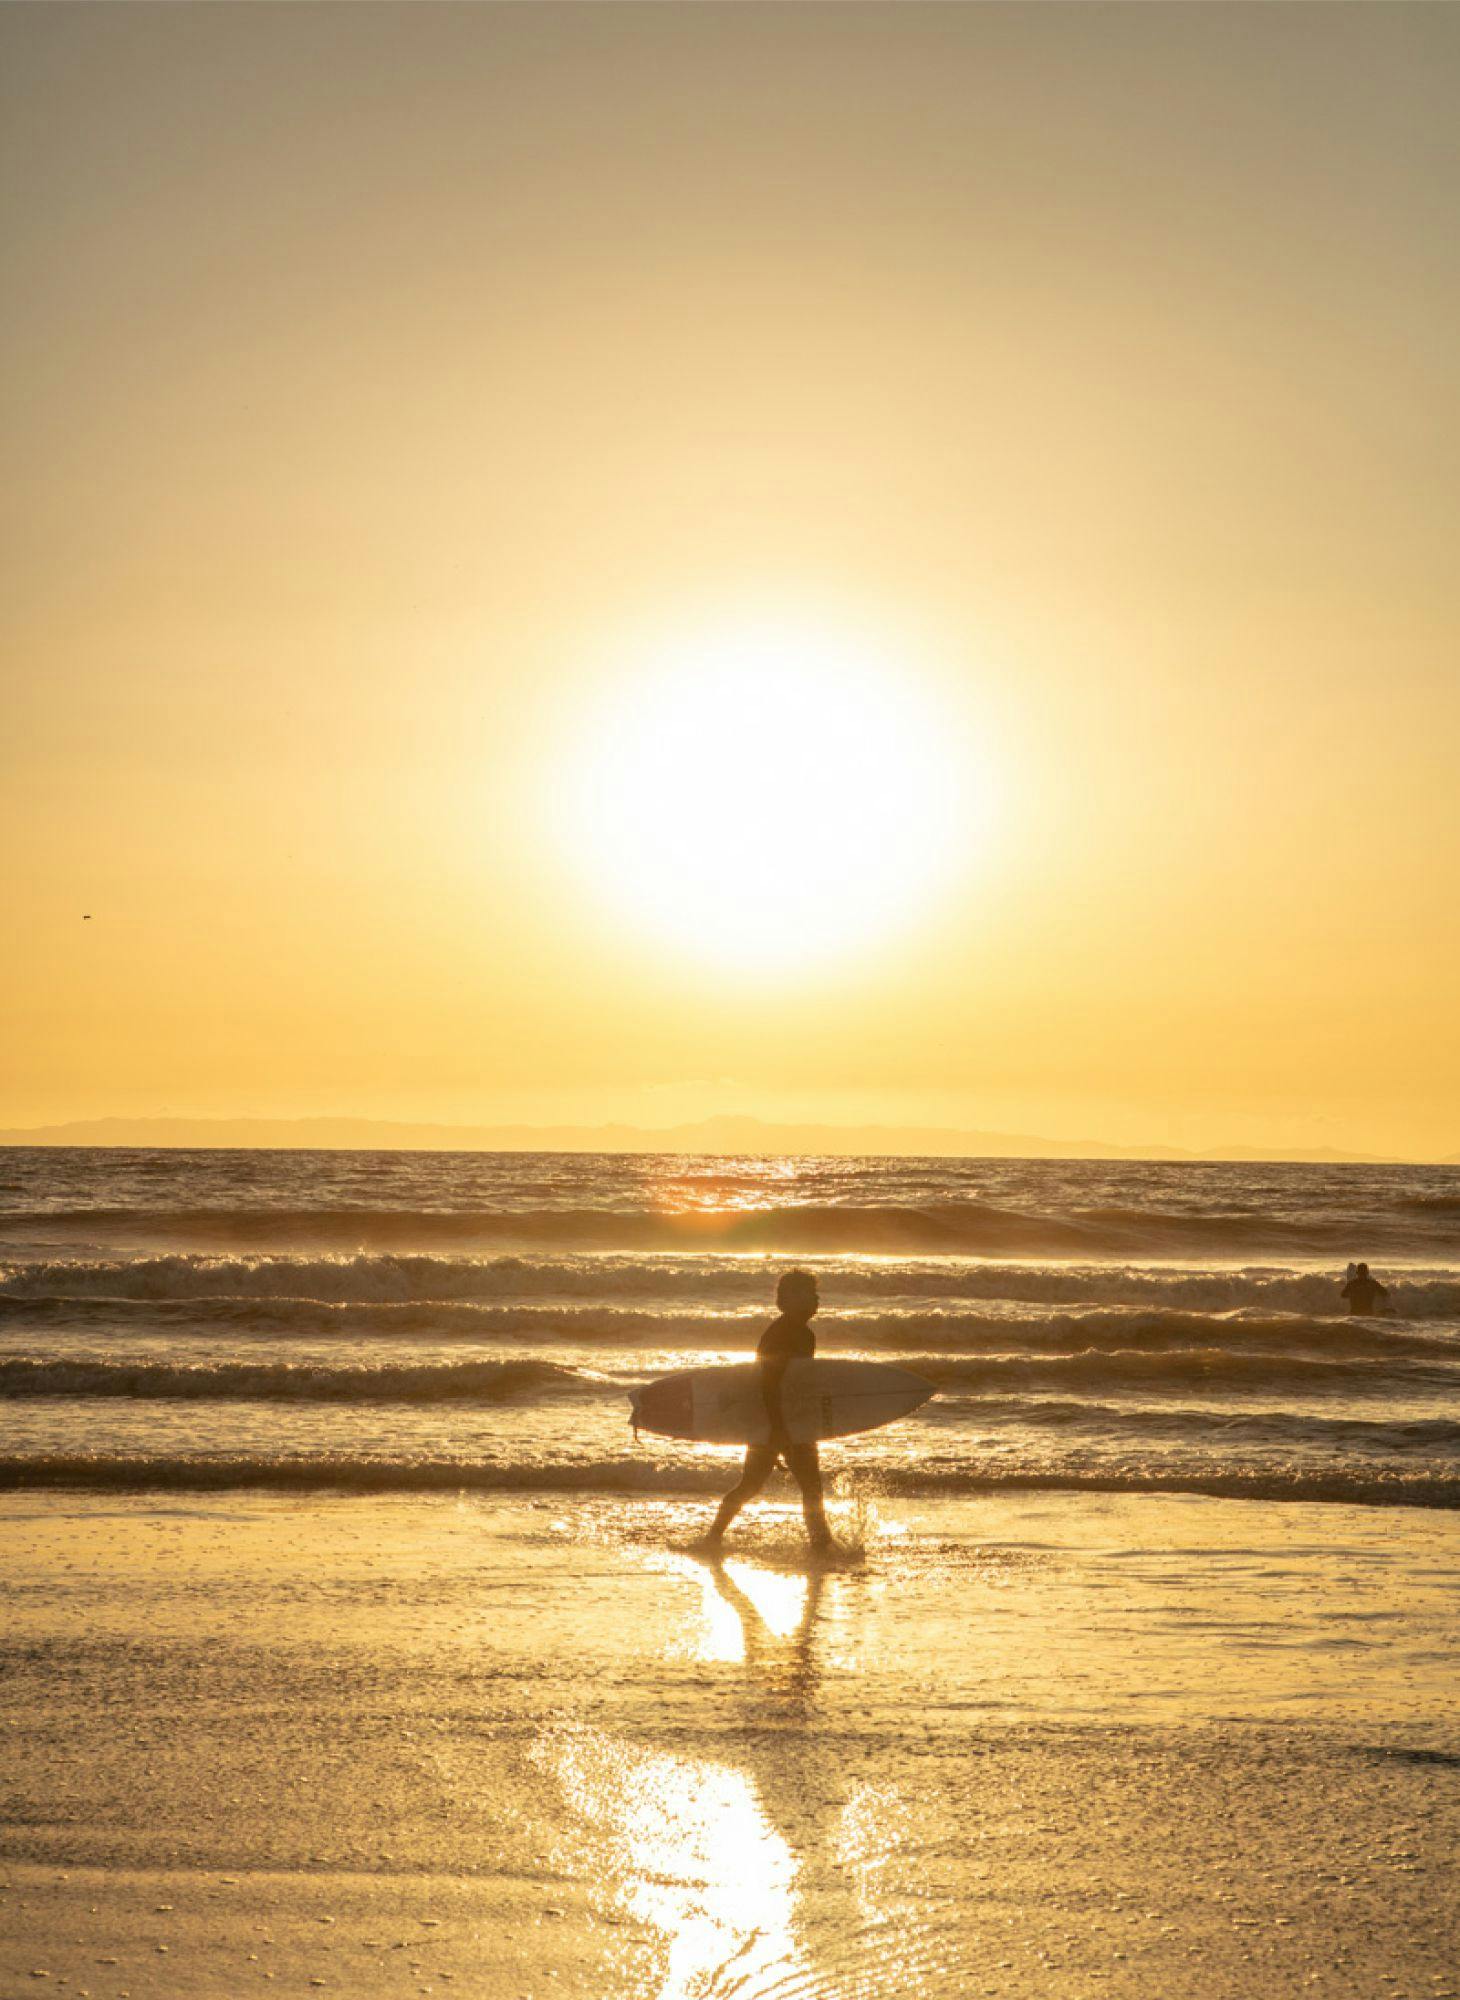 A surfer with surfboard running toward the ocean around sunset